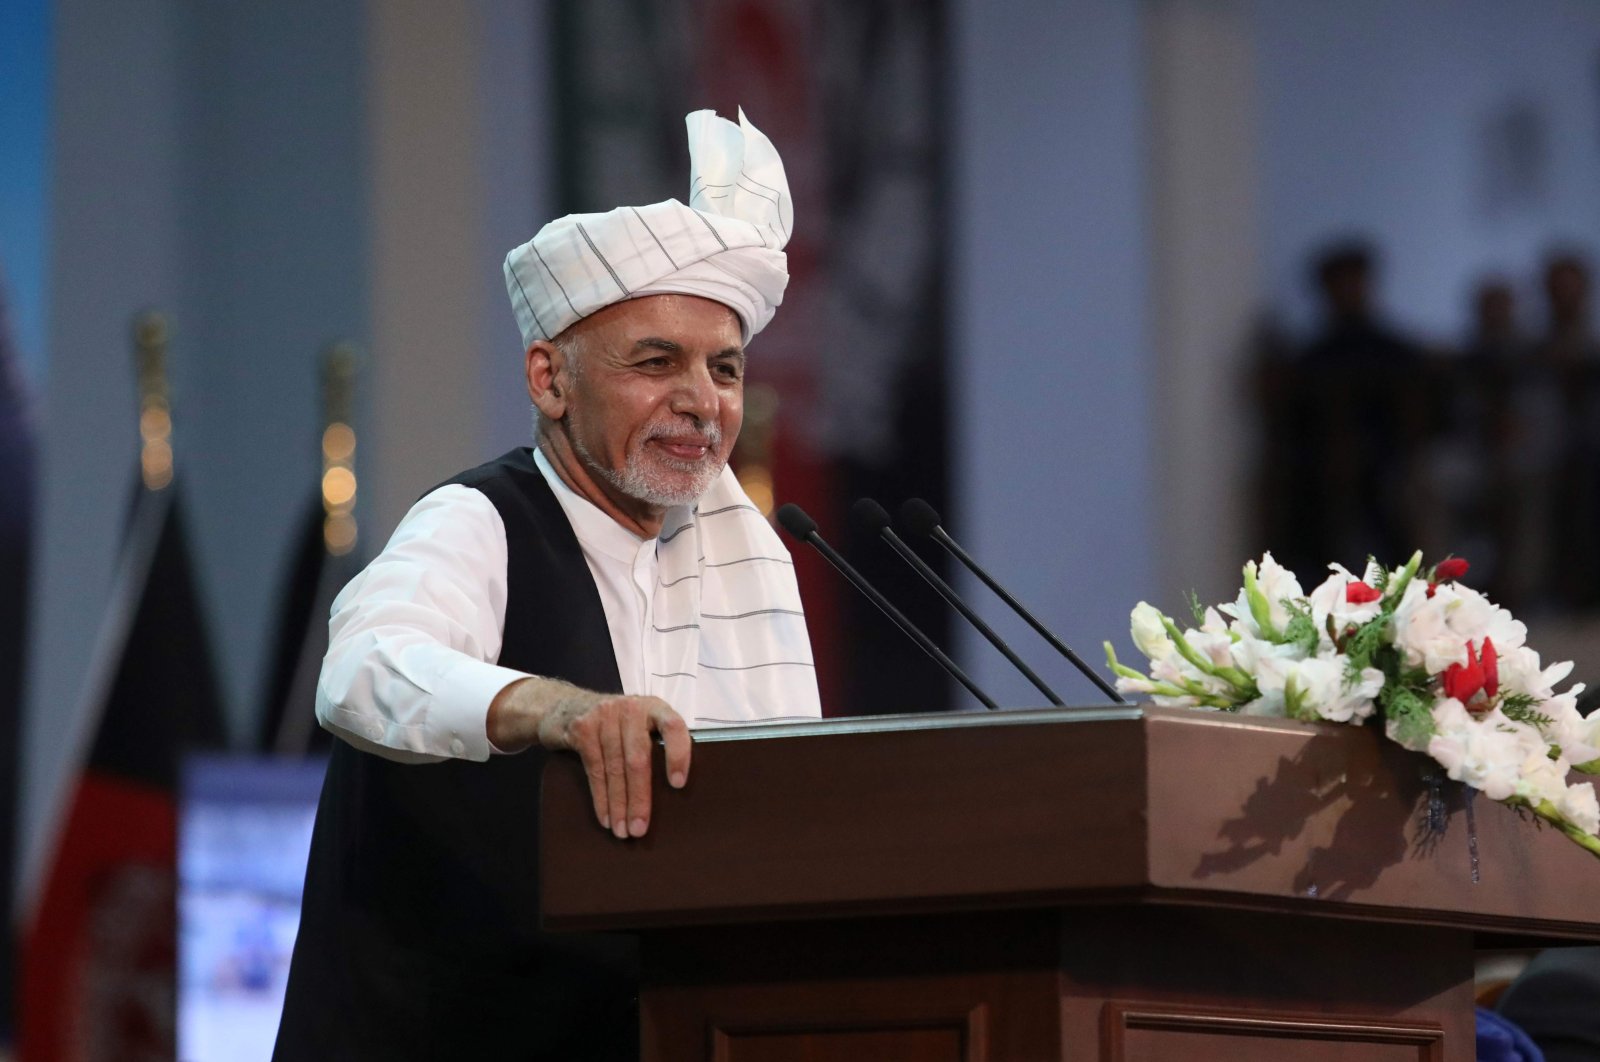 Afghan President Ashraf Ghani speaks during the last day of the Loya Jirga, a grand assembly, at the Loya Jirga Hall in Kabul, Aug. 9, 2020. (AFP Photo)